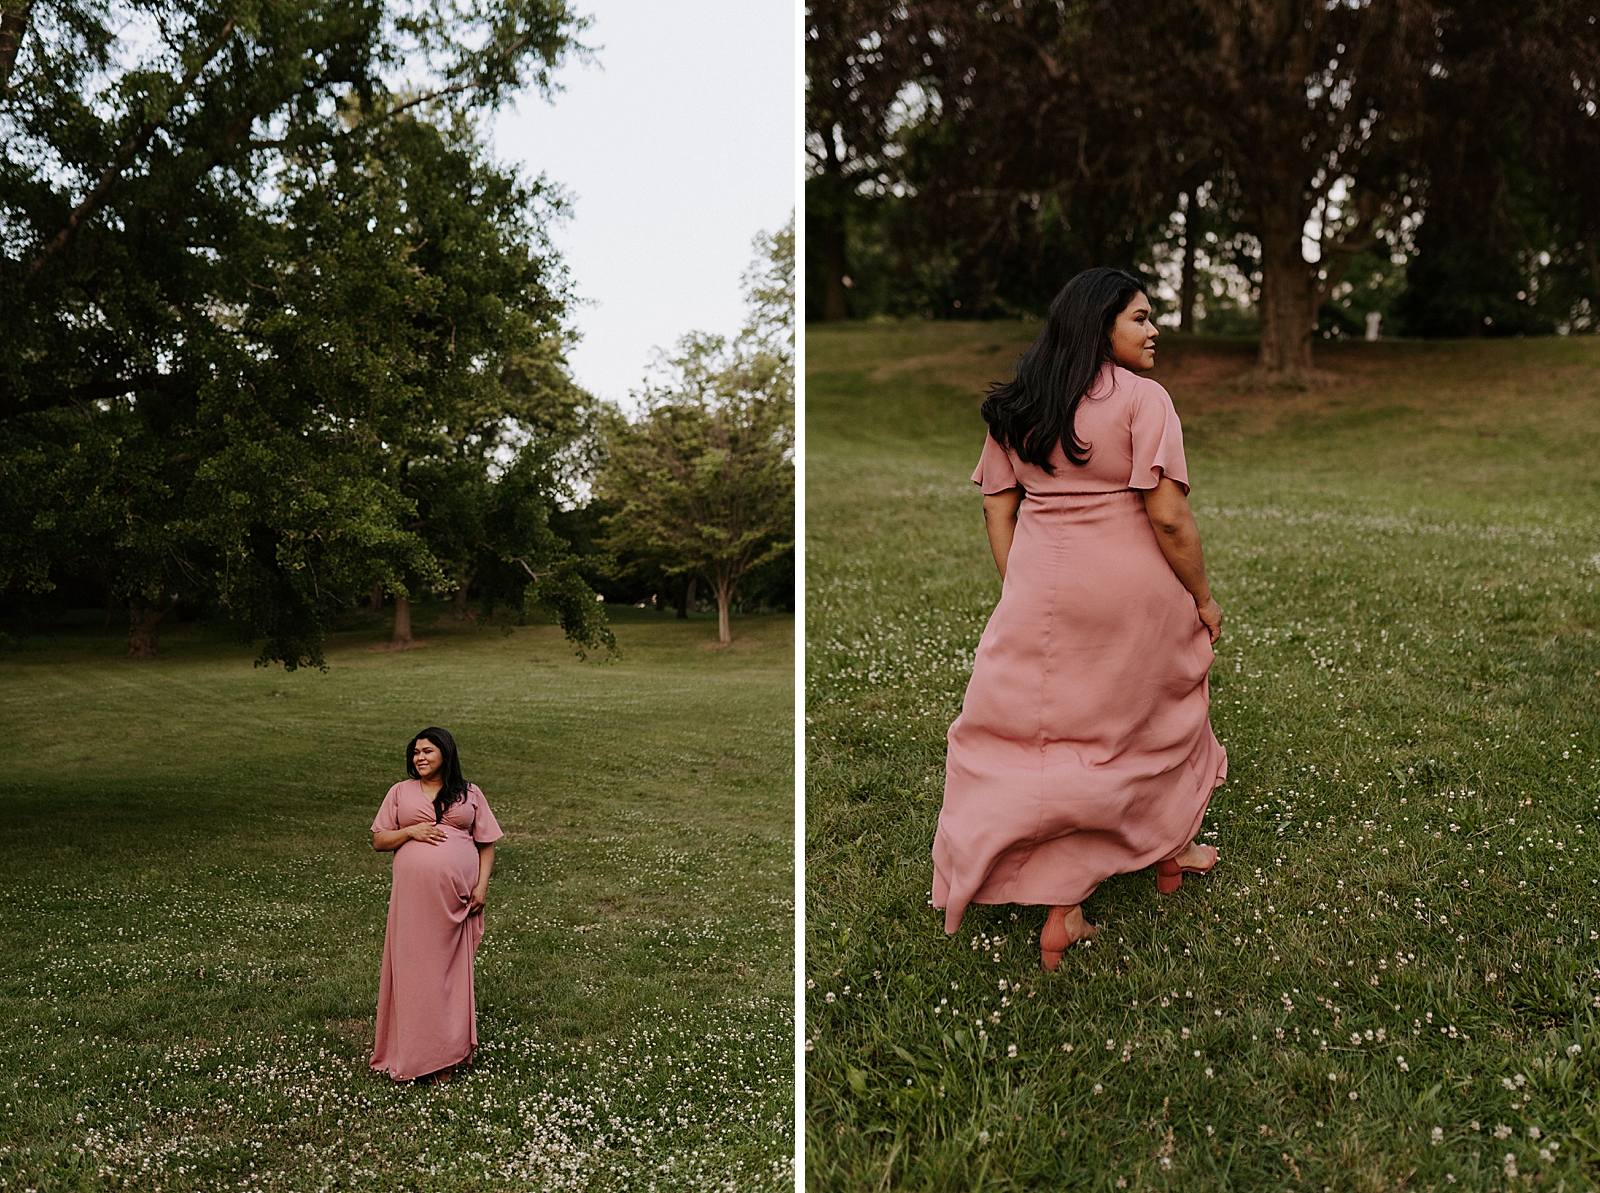 Pregnant woman standing on grassy field holding baby bump